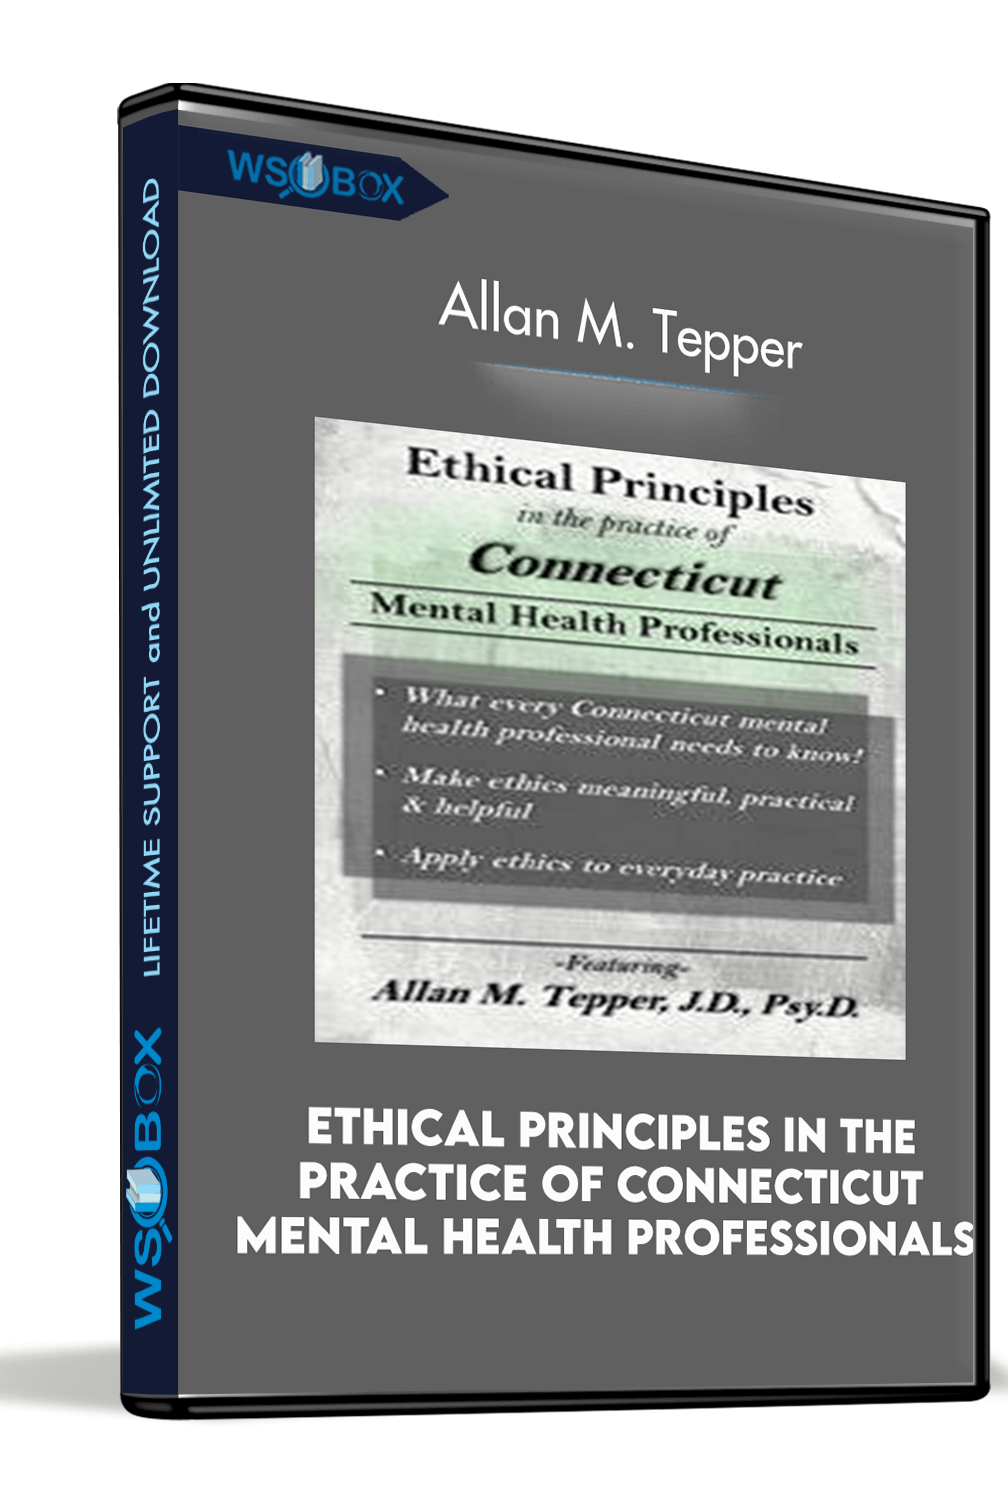 ethical-principles-in-the-practice-of-connecticut-mental-health-professionals-allan-m-tepper